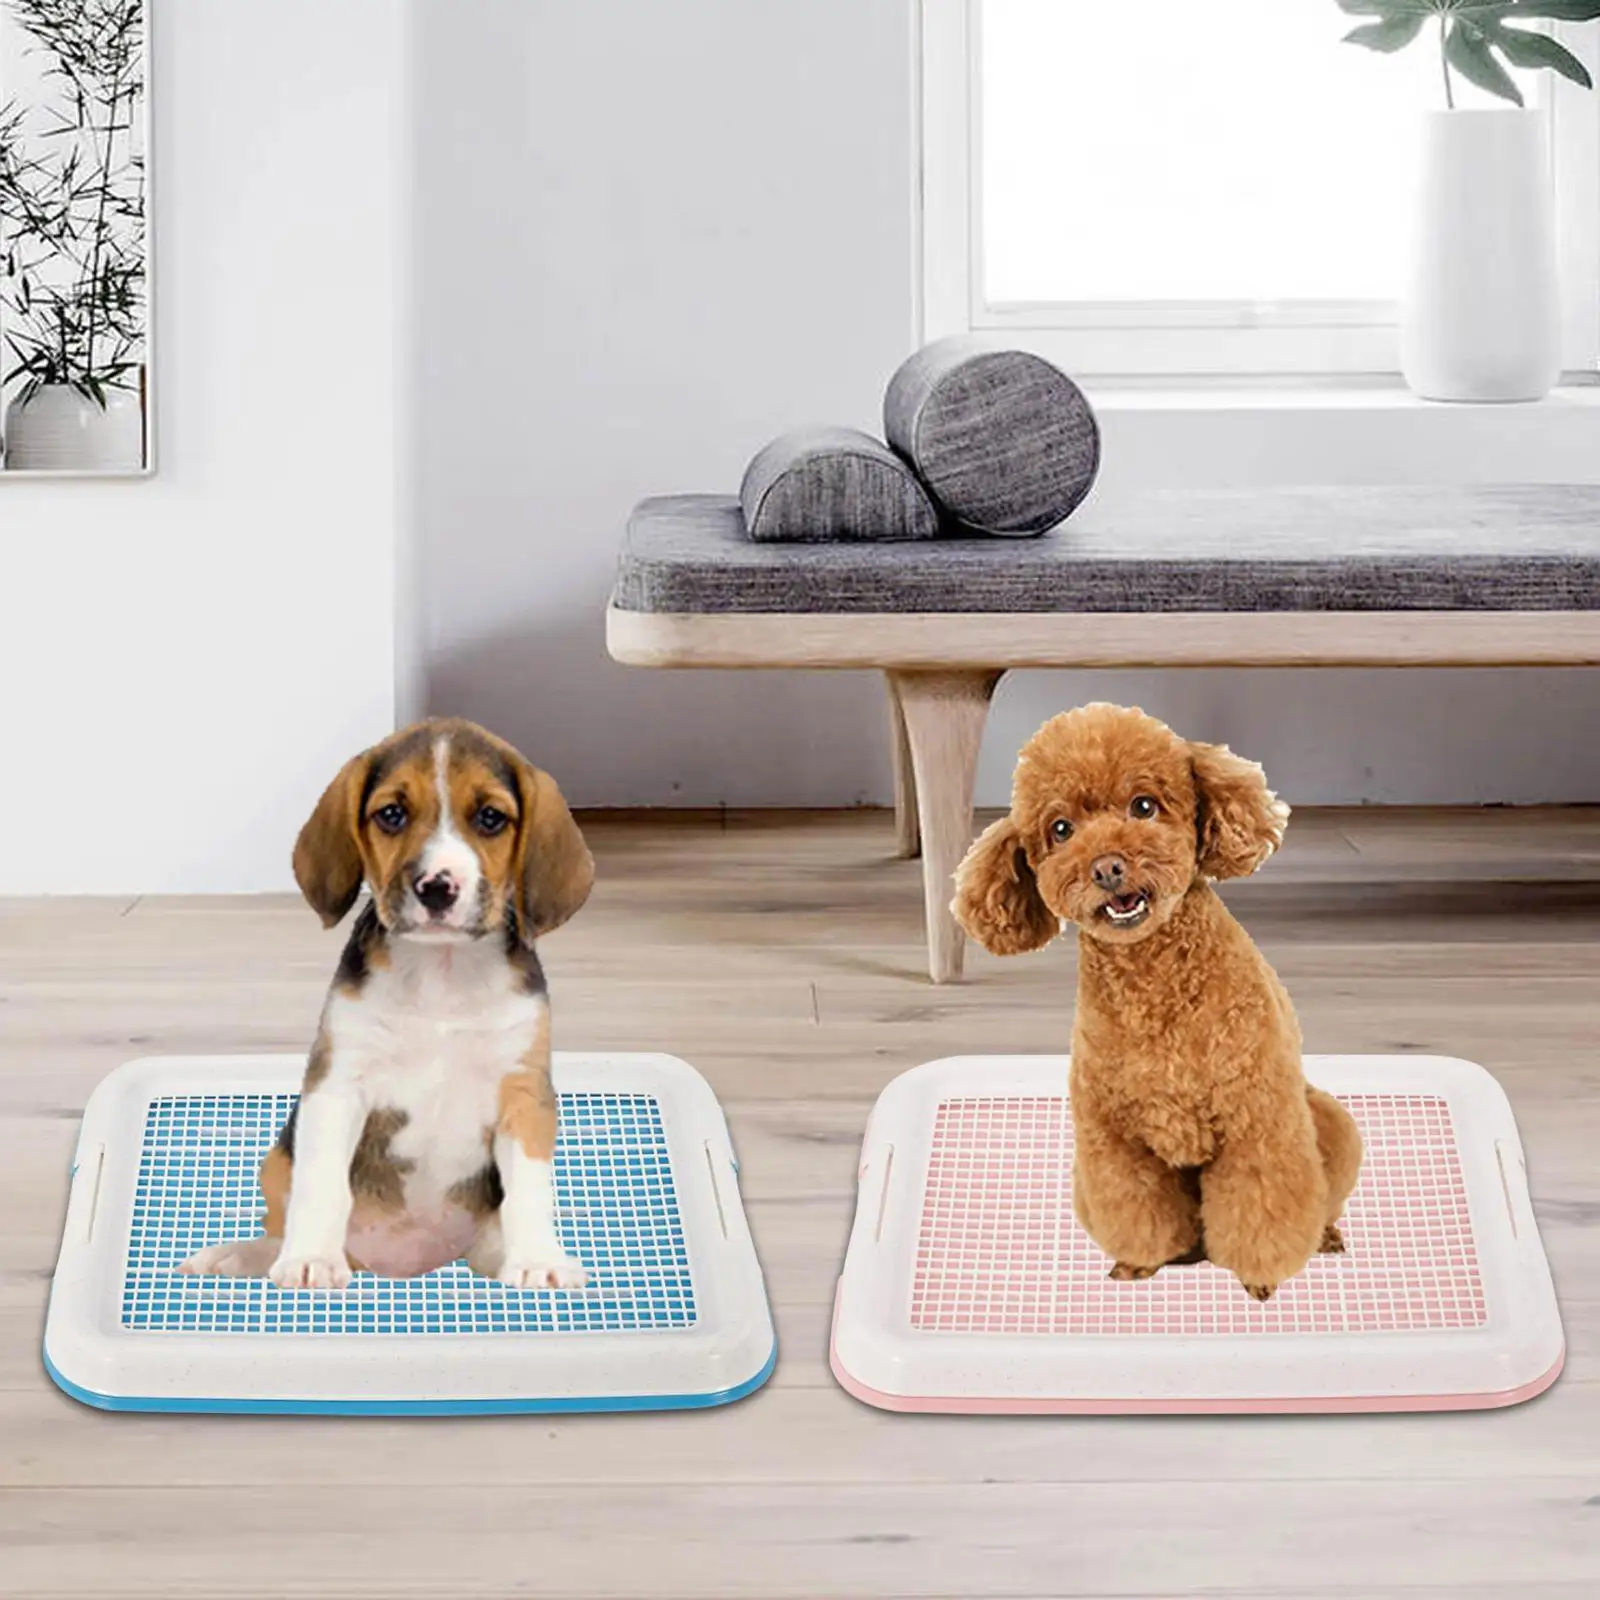 Dog Potty Toilet Training Tray Indoor Outdoor 18.5x13.8 inch with Secure Latch